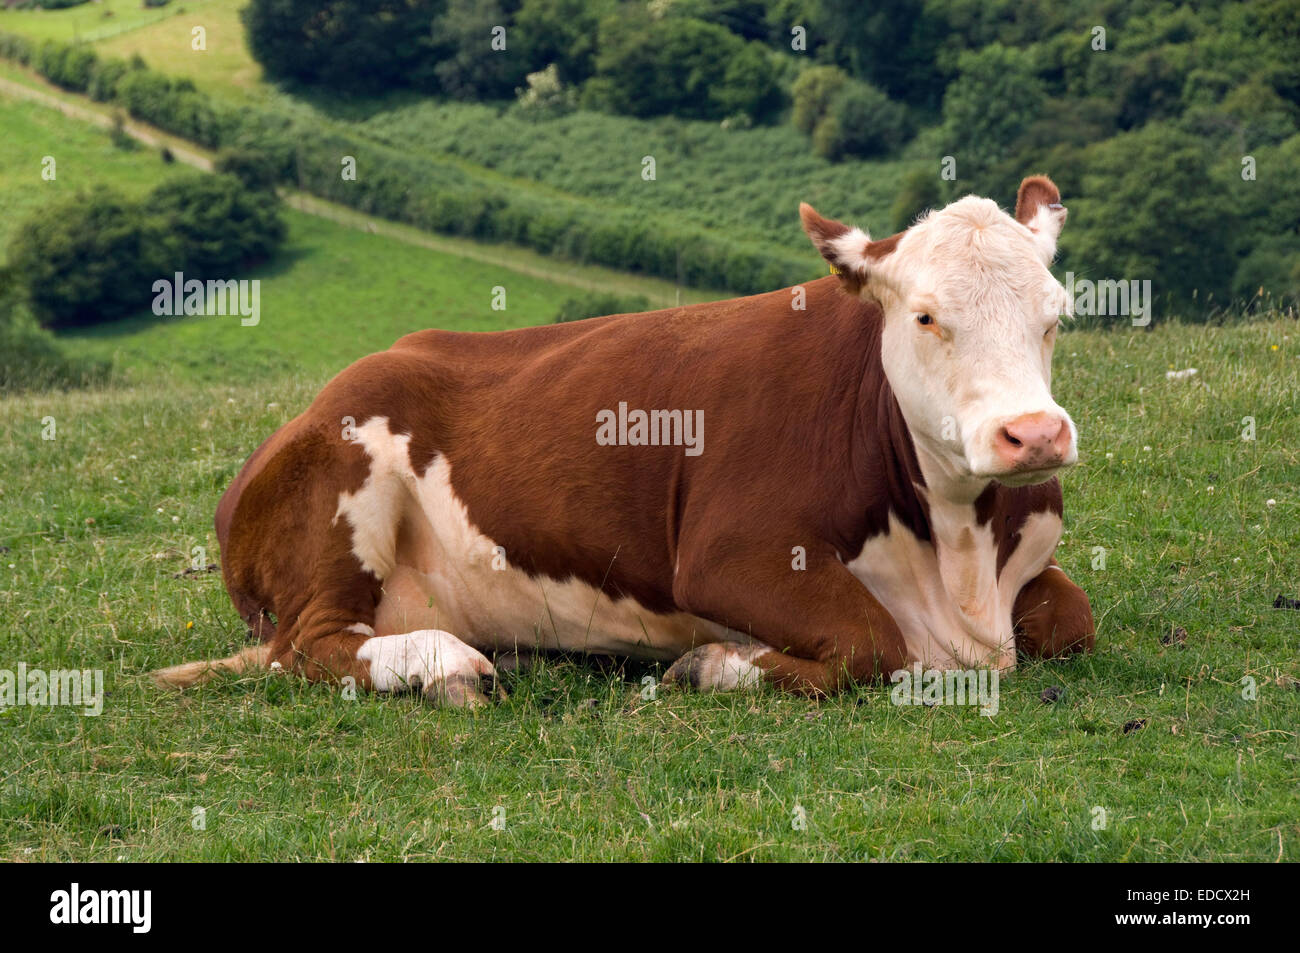 Hereford cow. Stock Photo